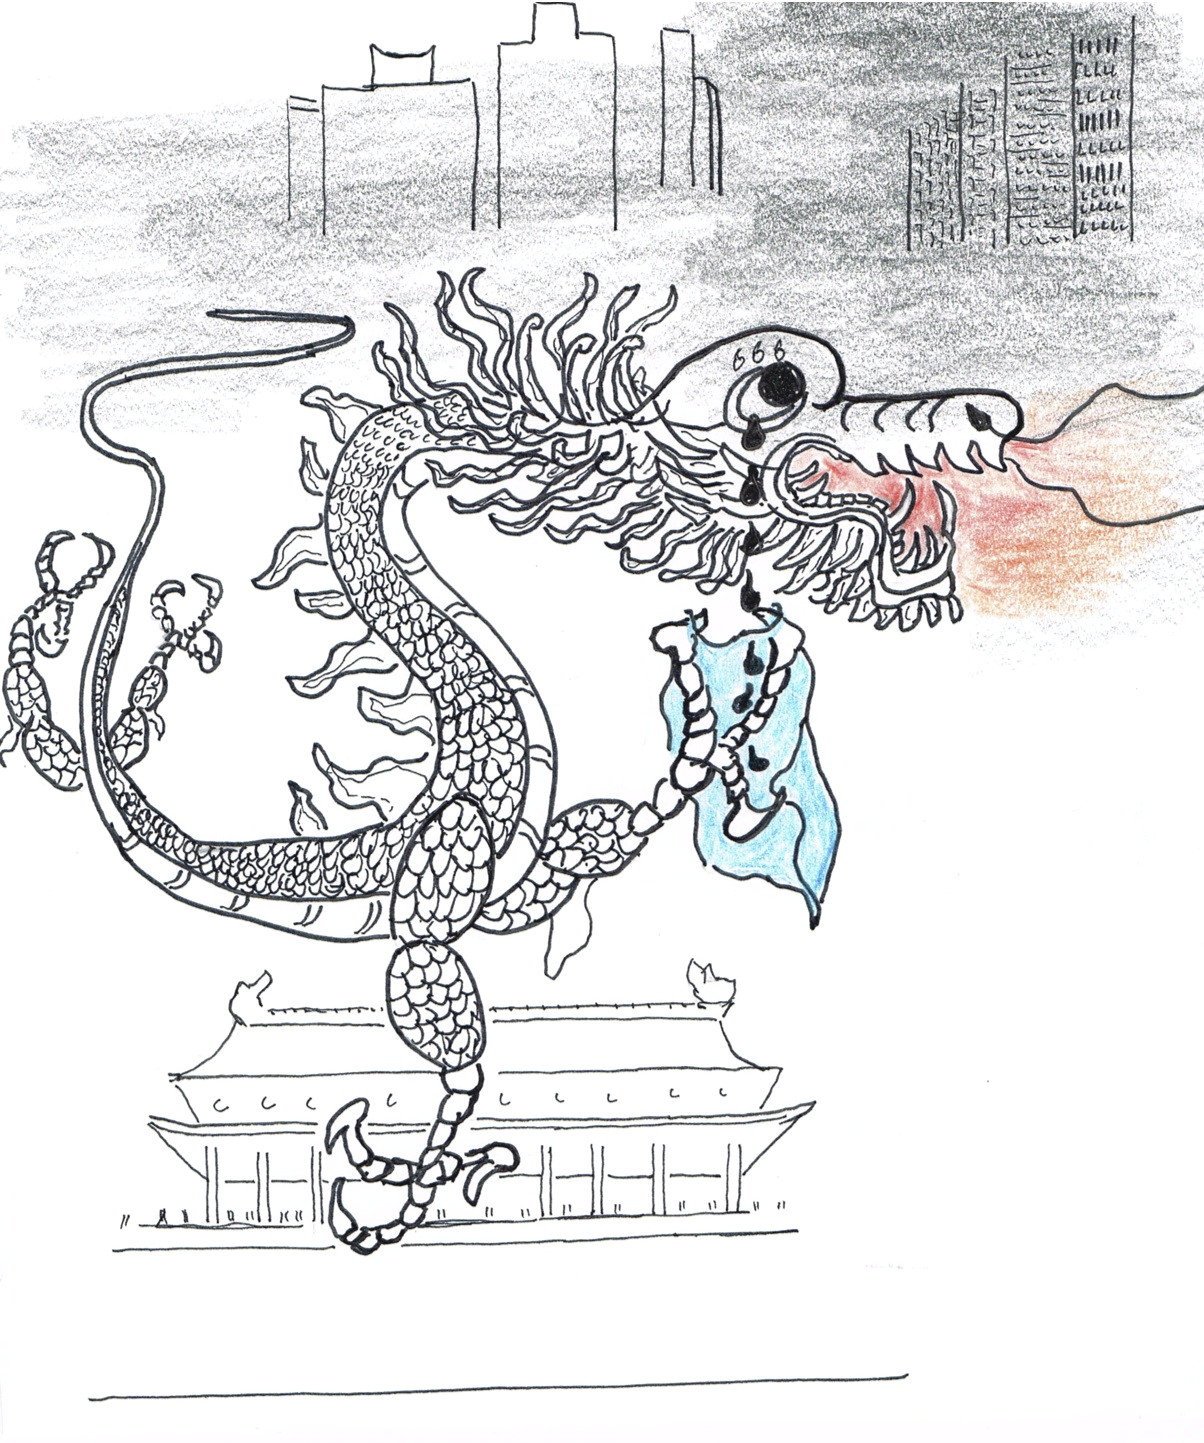 Drawings Of Sleeping Dragons the Desolation Of Smog Hung Drawn and Cultured